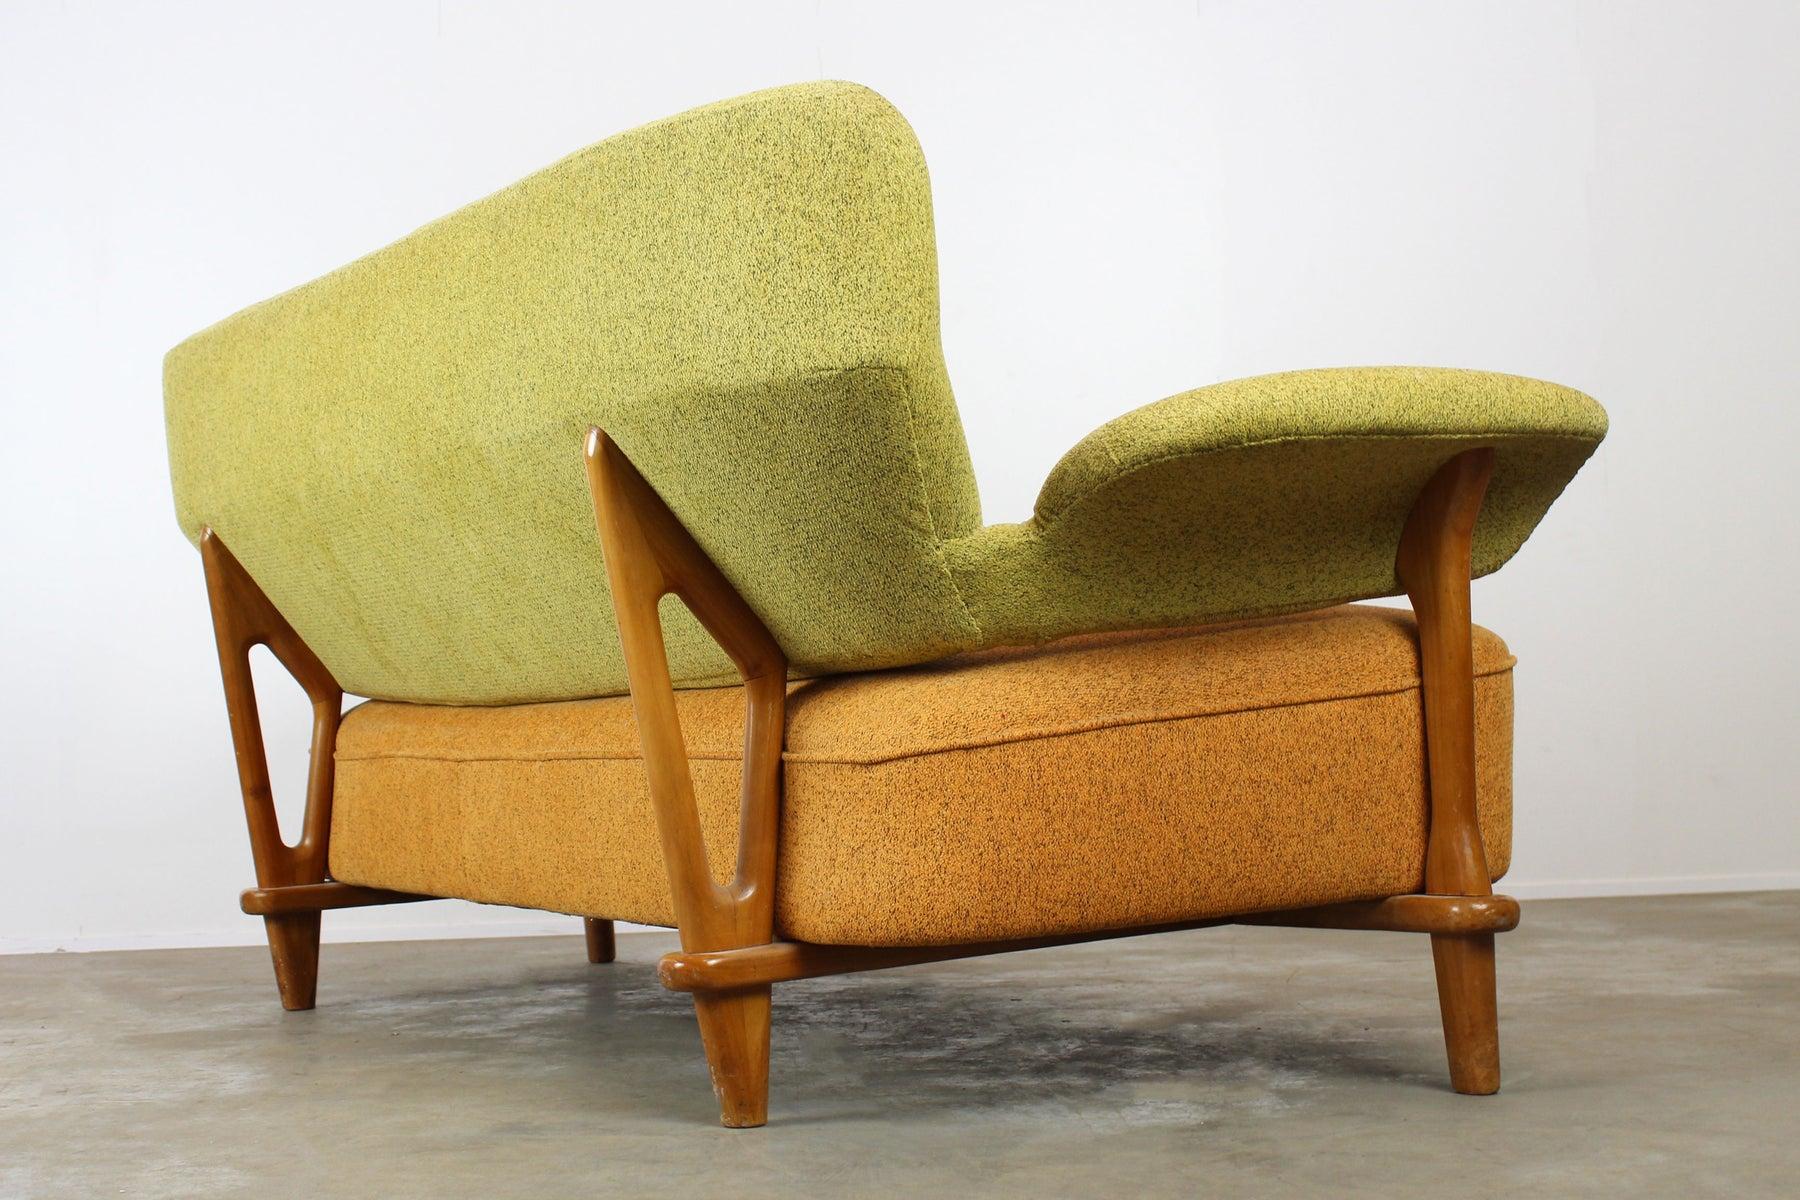 Mid-20th Century Rare Dutch Design sofa by Theo Ruth F109 for Artifort 1950 Mid-Century Modern For Sale